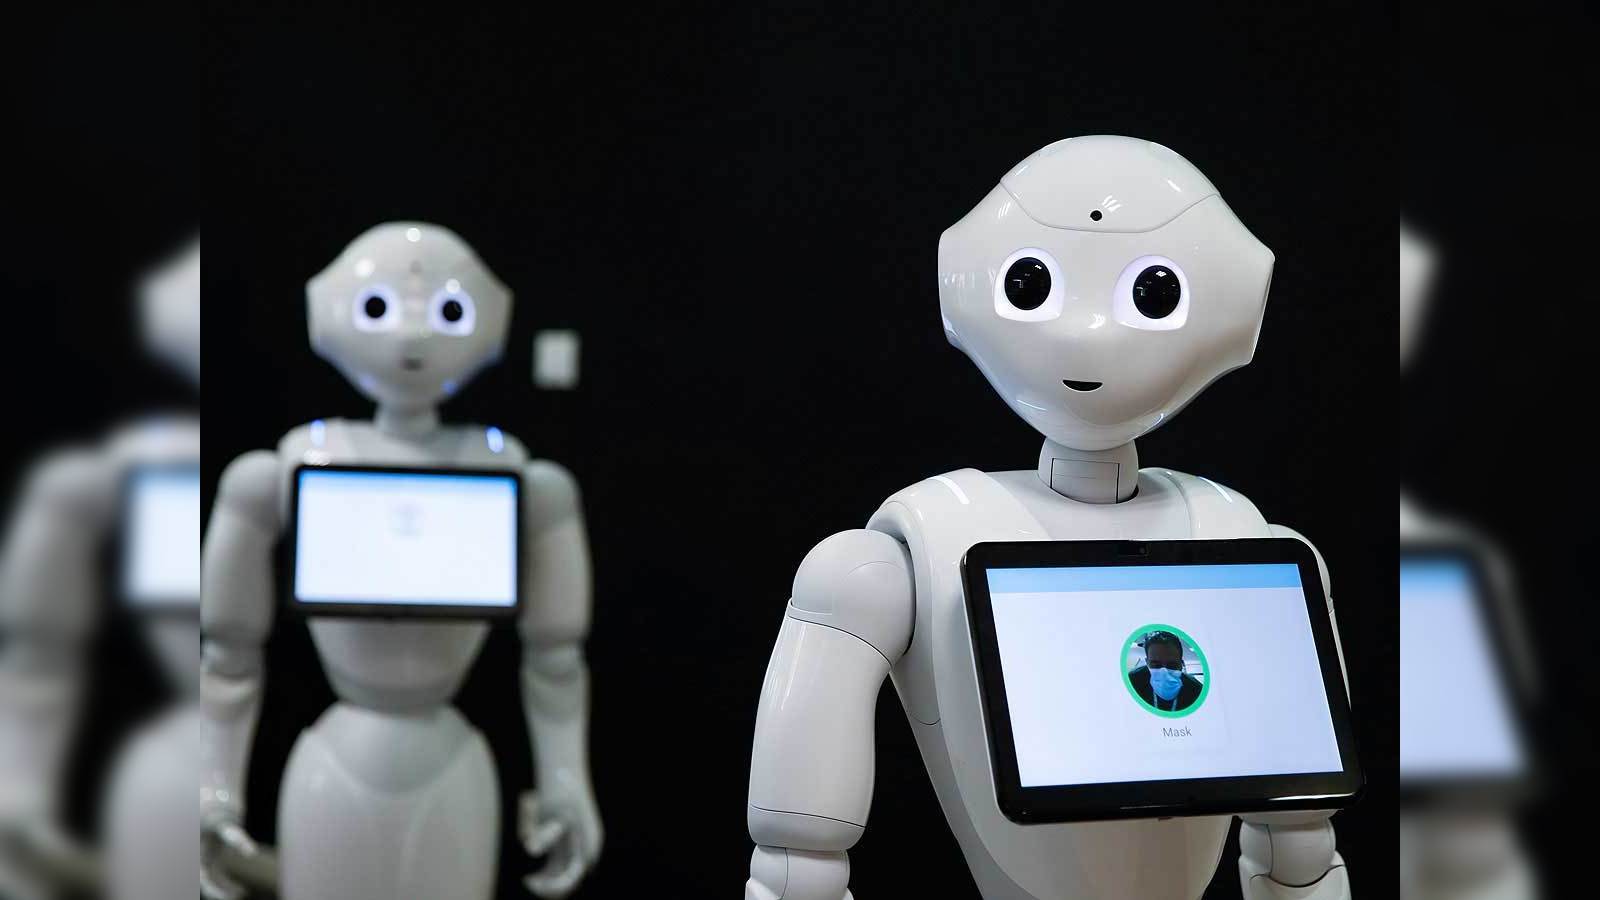 Pepper: Covid robocop: Pepper, friendly robot, gives reminders to